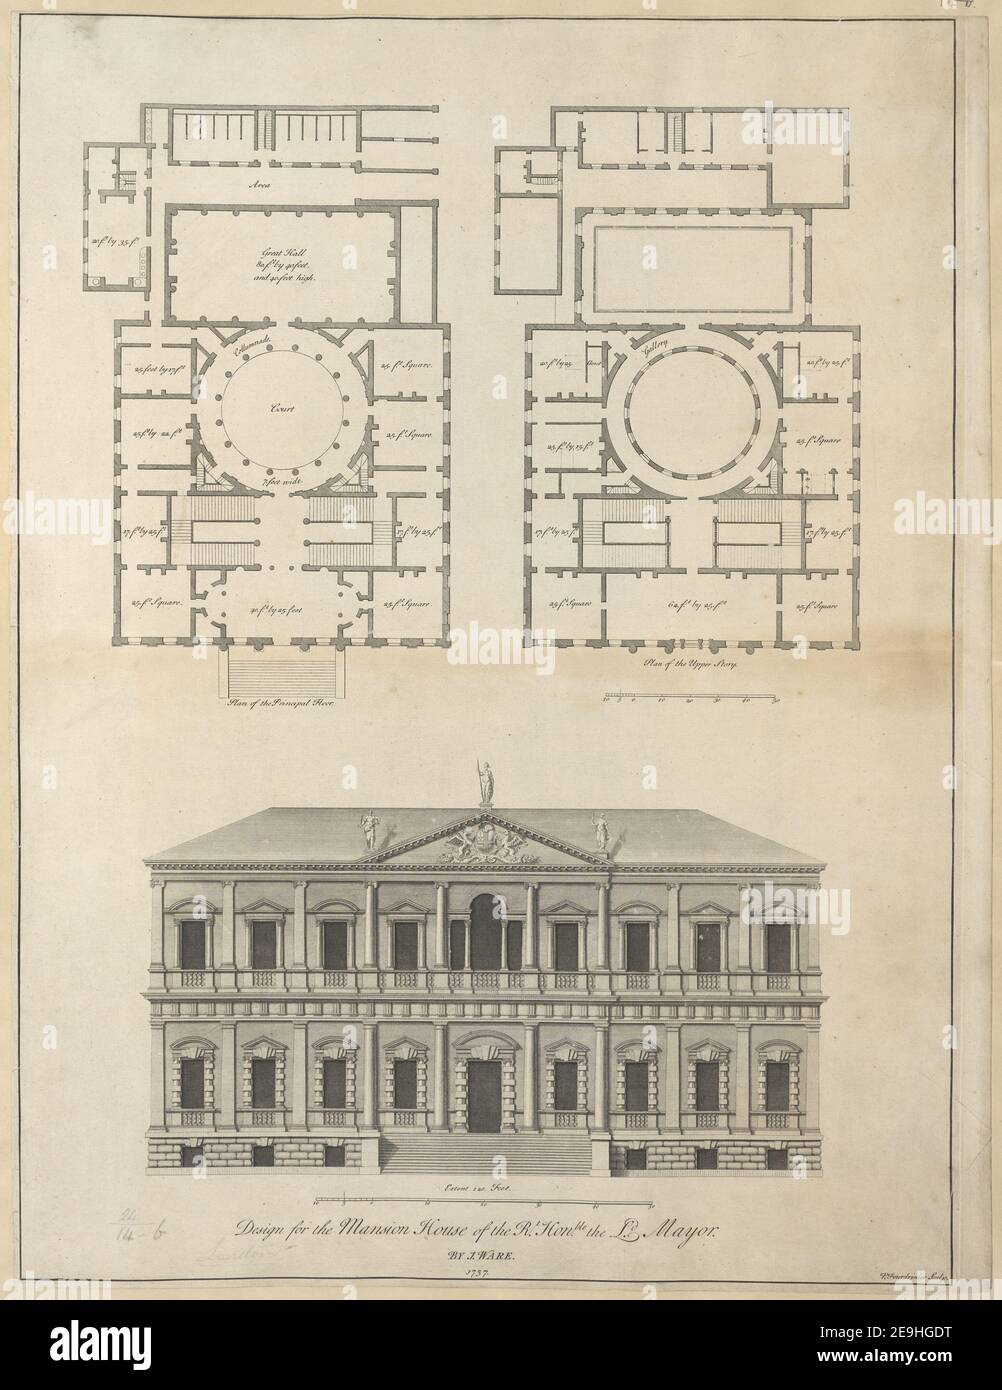 Design for the Mansion House of the R.t Hon.ble L.d Mayor.  Author  Fourdrinier, Paul 24.14.b. Place of publication: [London] Publisher: [publisher not identified] Date of publication: [1737]  Item type: 1 print Medium: etching and engraving Dimensions: sheet 59.8 x 46 cm (trimmed)  Former owner: George III, King of Great Britain, 1738-1820 Stock Photo